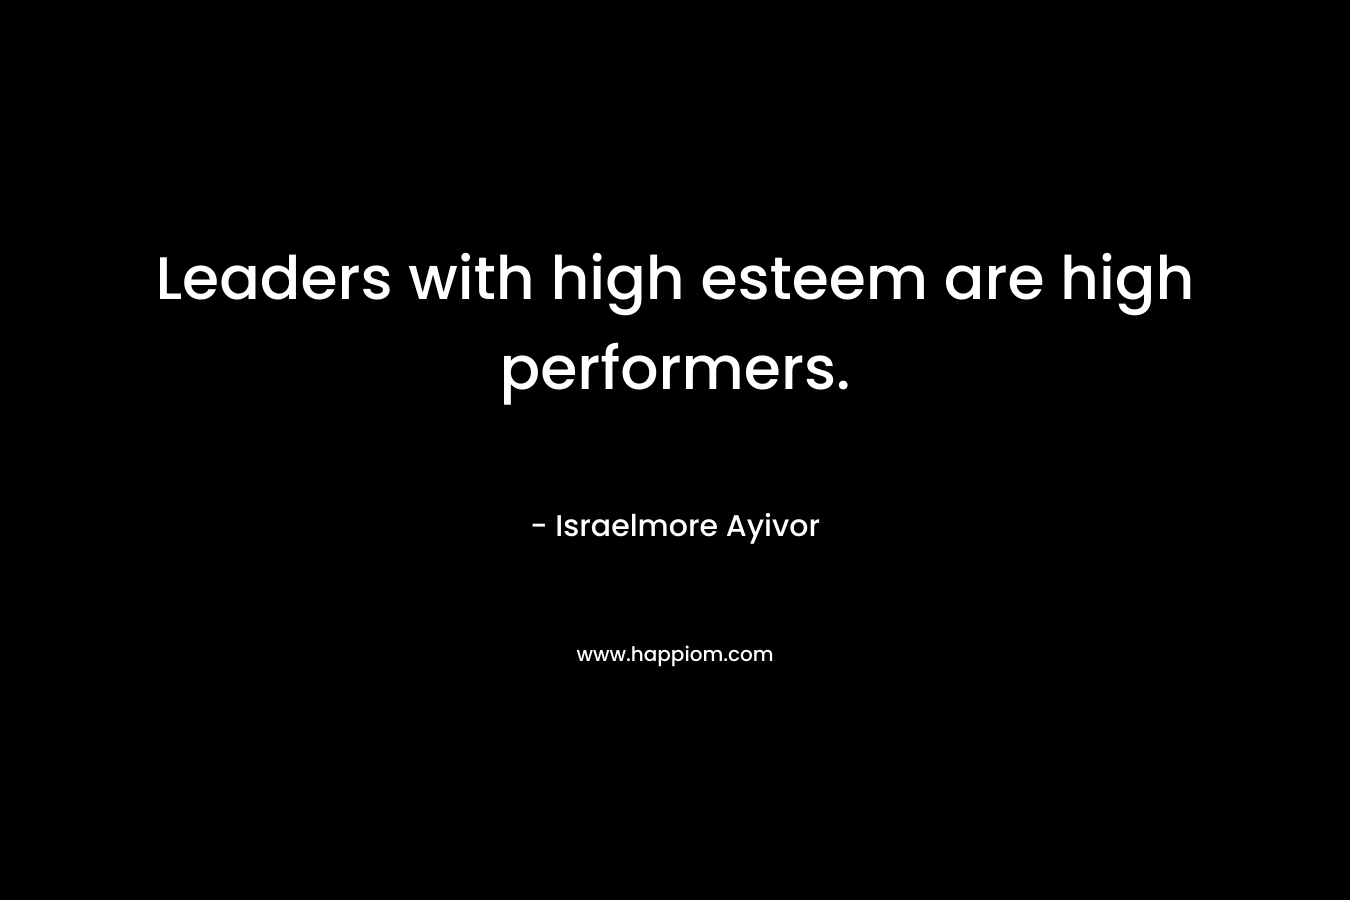 Leaders with high esteem are high performers.